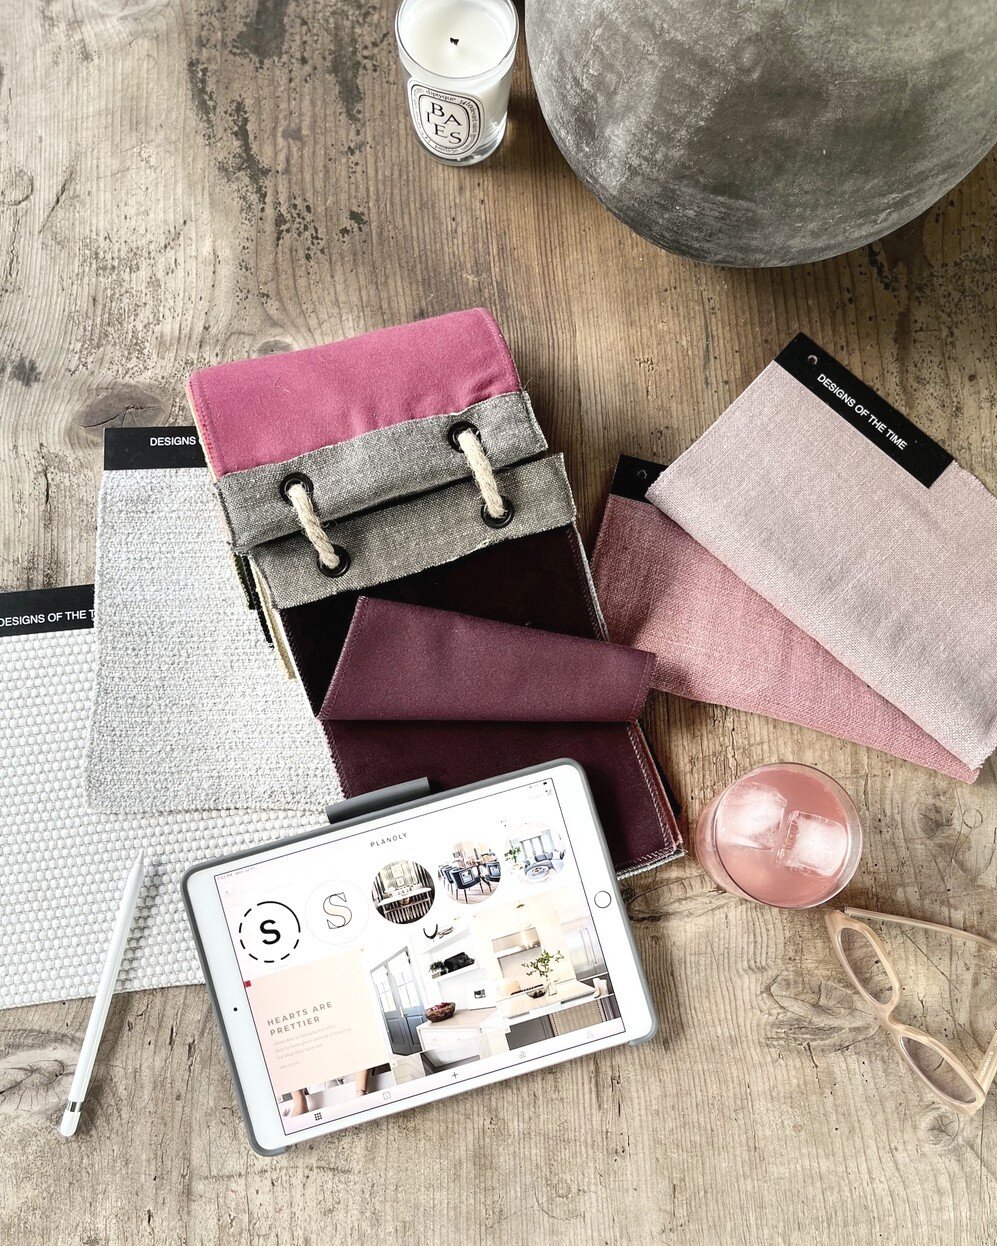 Always scheming and creating || Pretty in Pink ​​​​​​​​
One of the best parts of my job~ taking time to explore new textiles and palettes. #grateful​​​​​​​​
​​​​​​​​
Photo @hannahvieregg